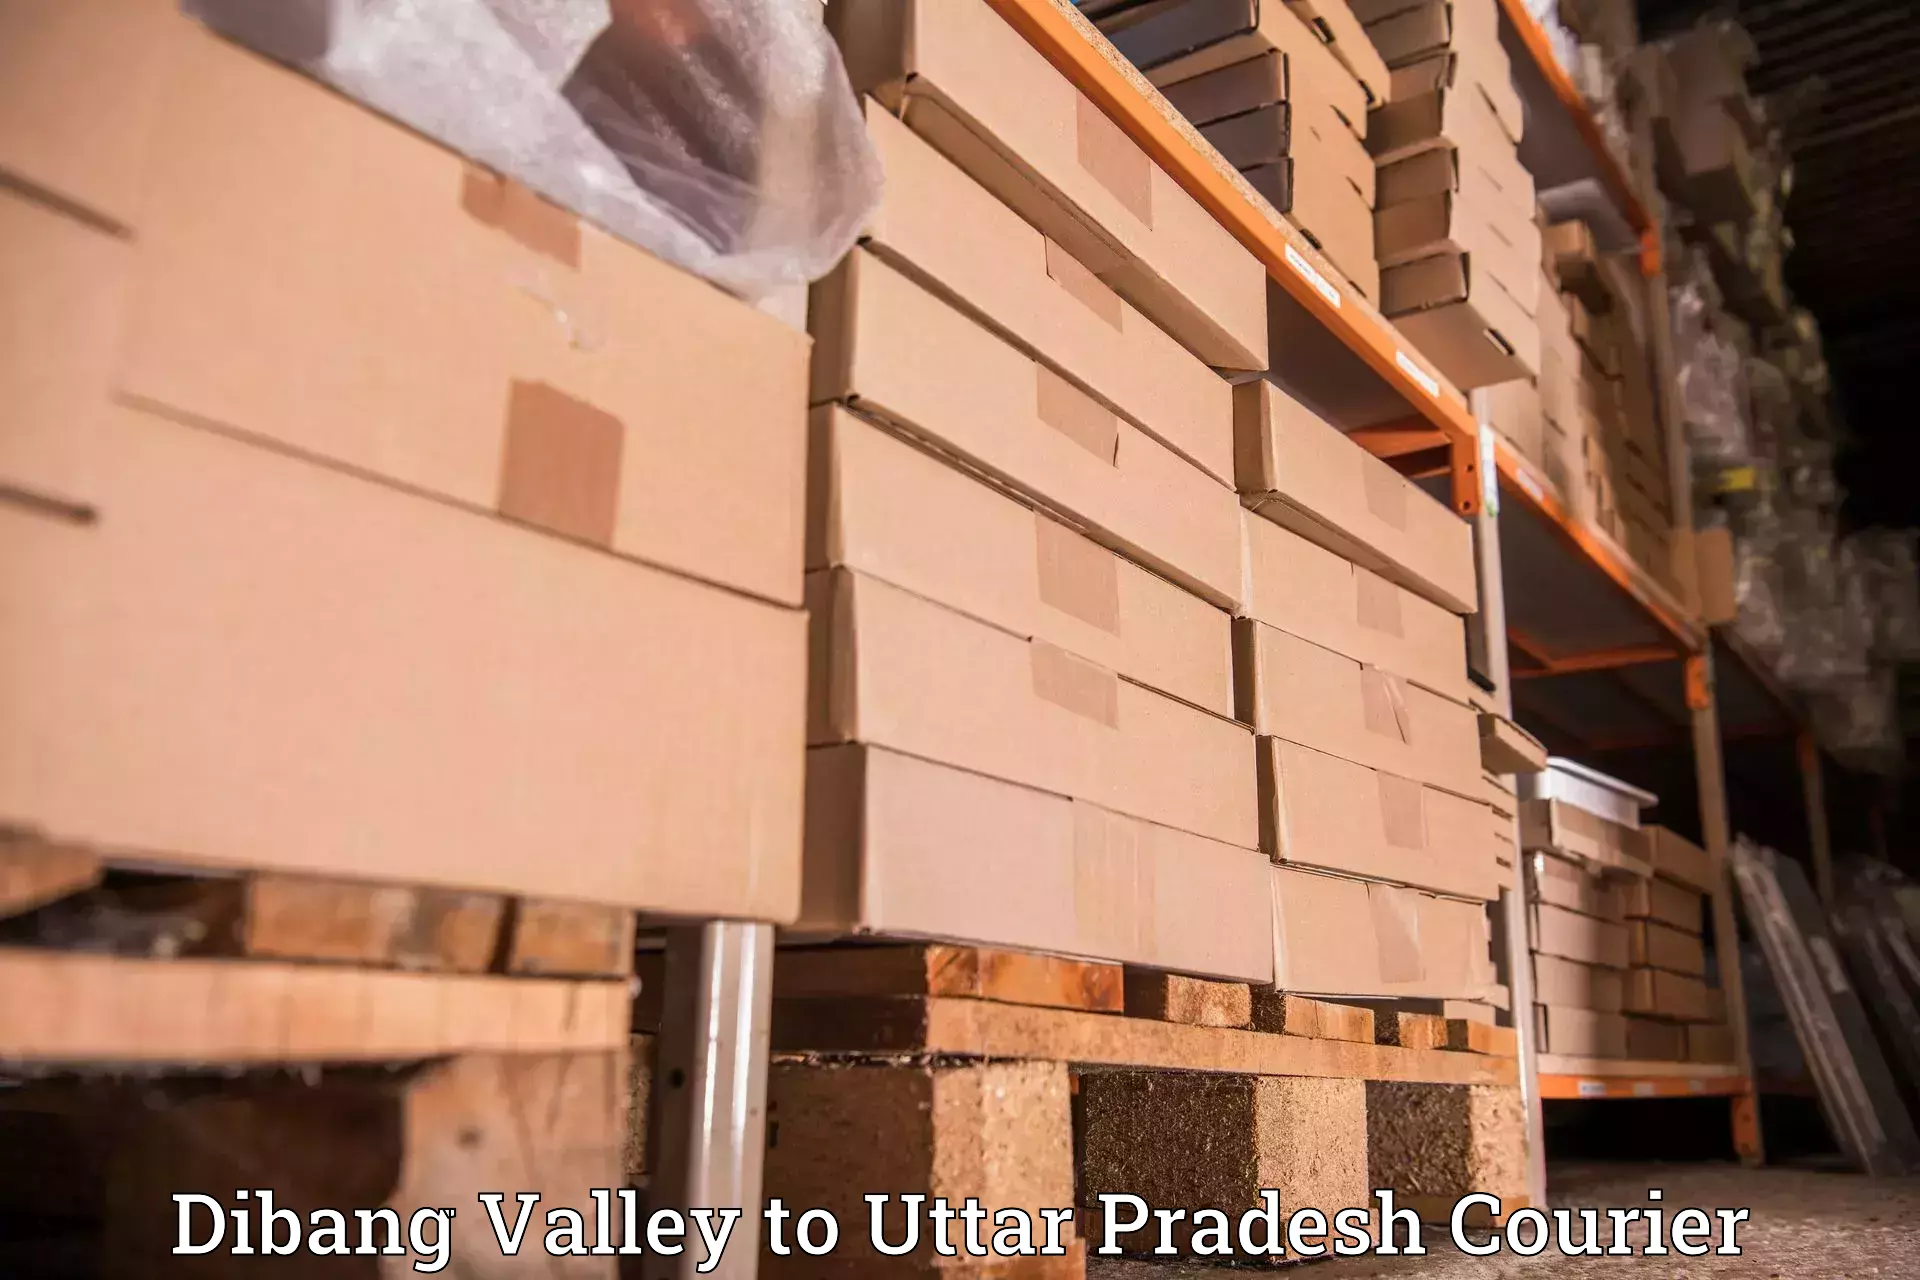 Retail shipping solutions in Dibang Valley to Saray Ankil